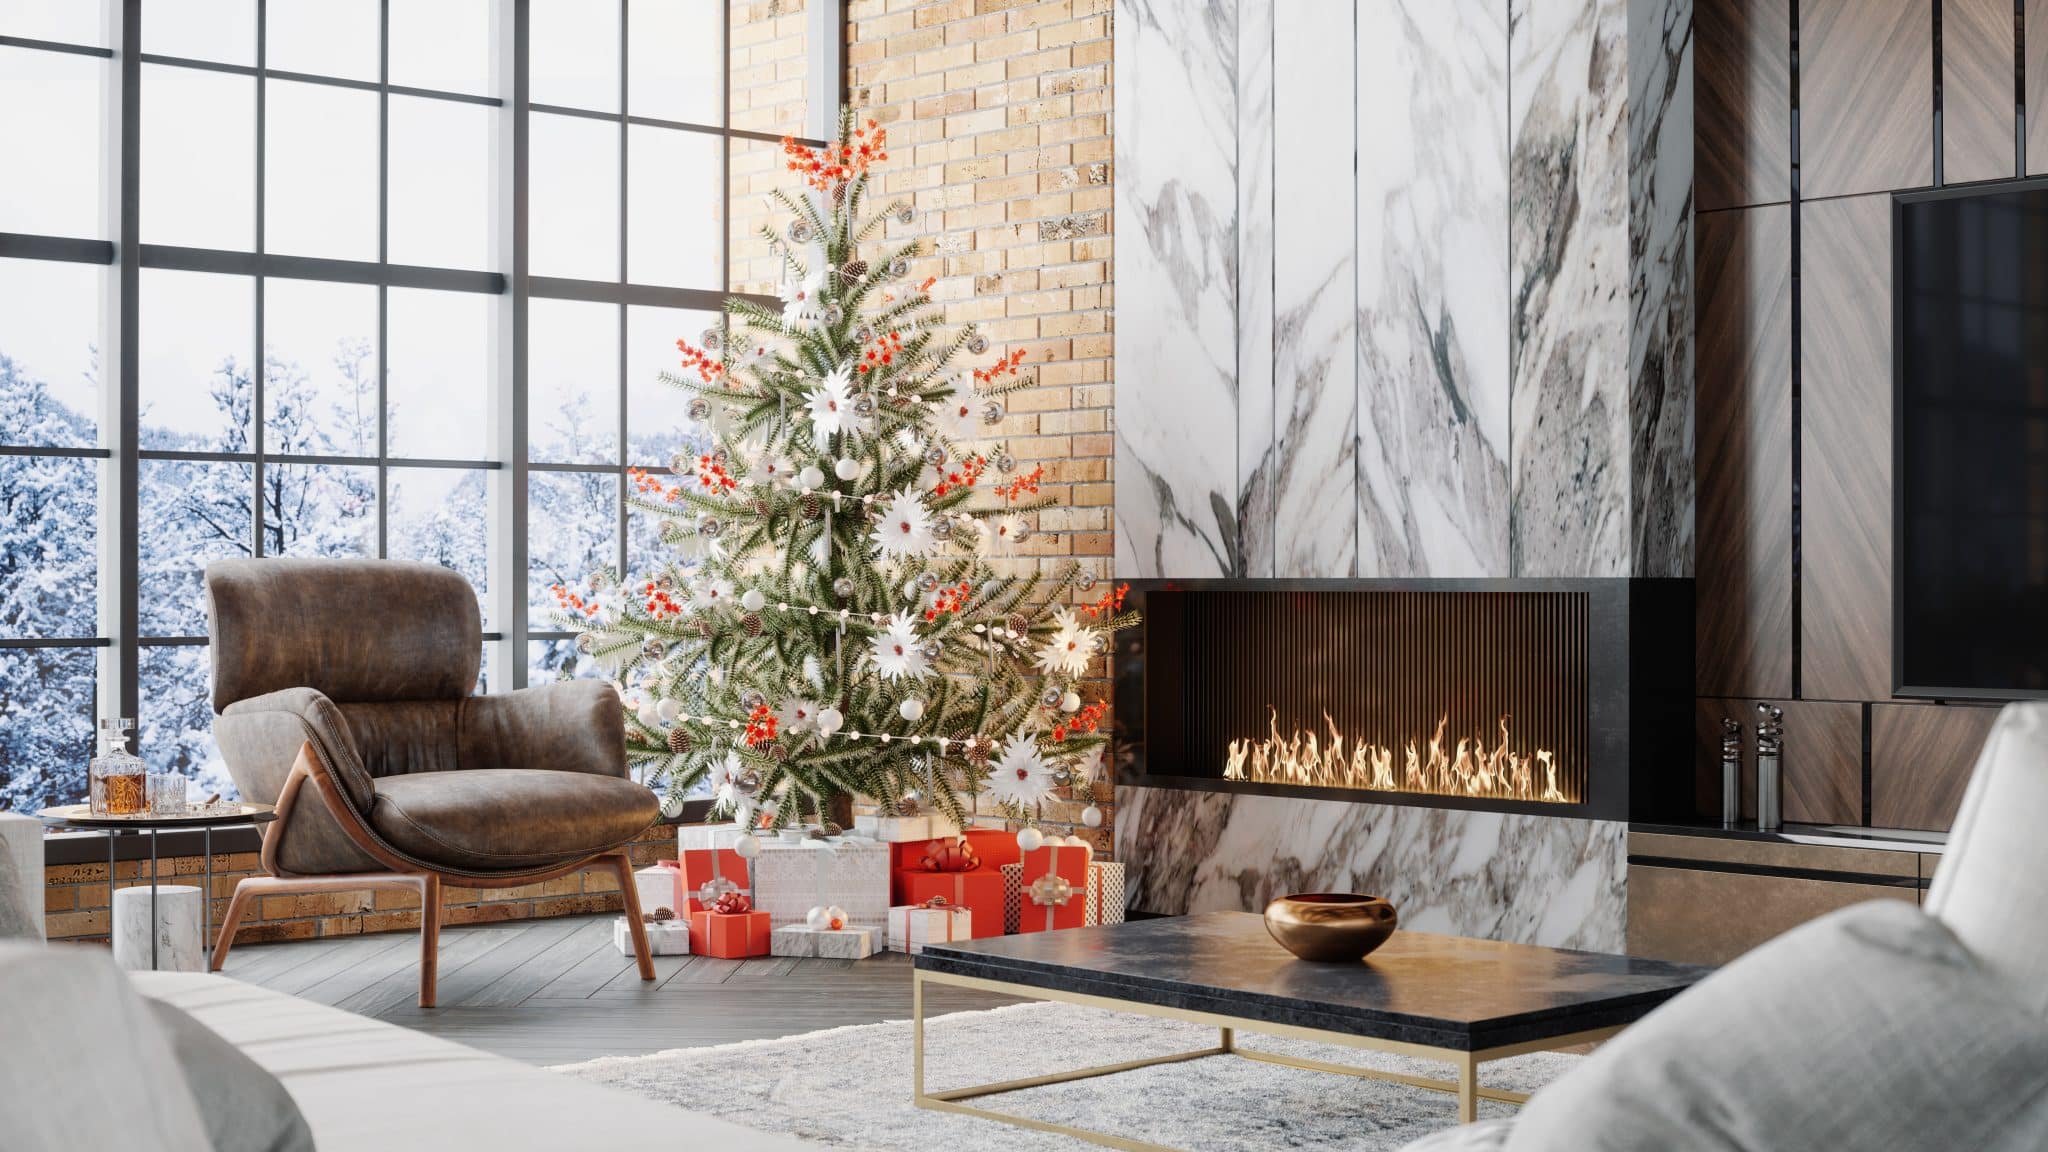 Interior of a luxurious custom home's holiday decorating